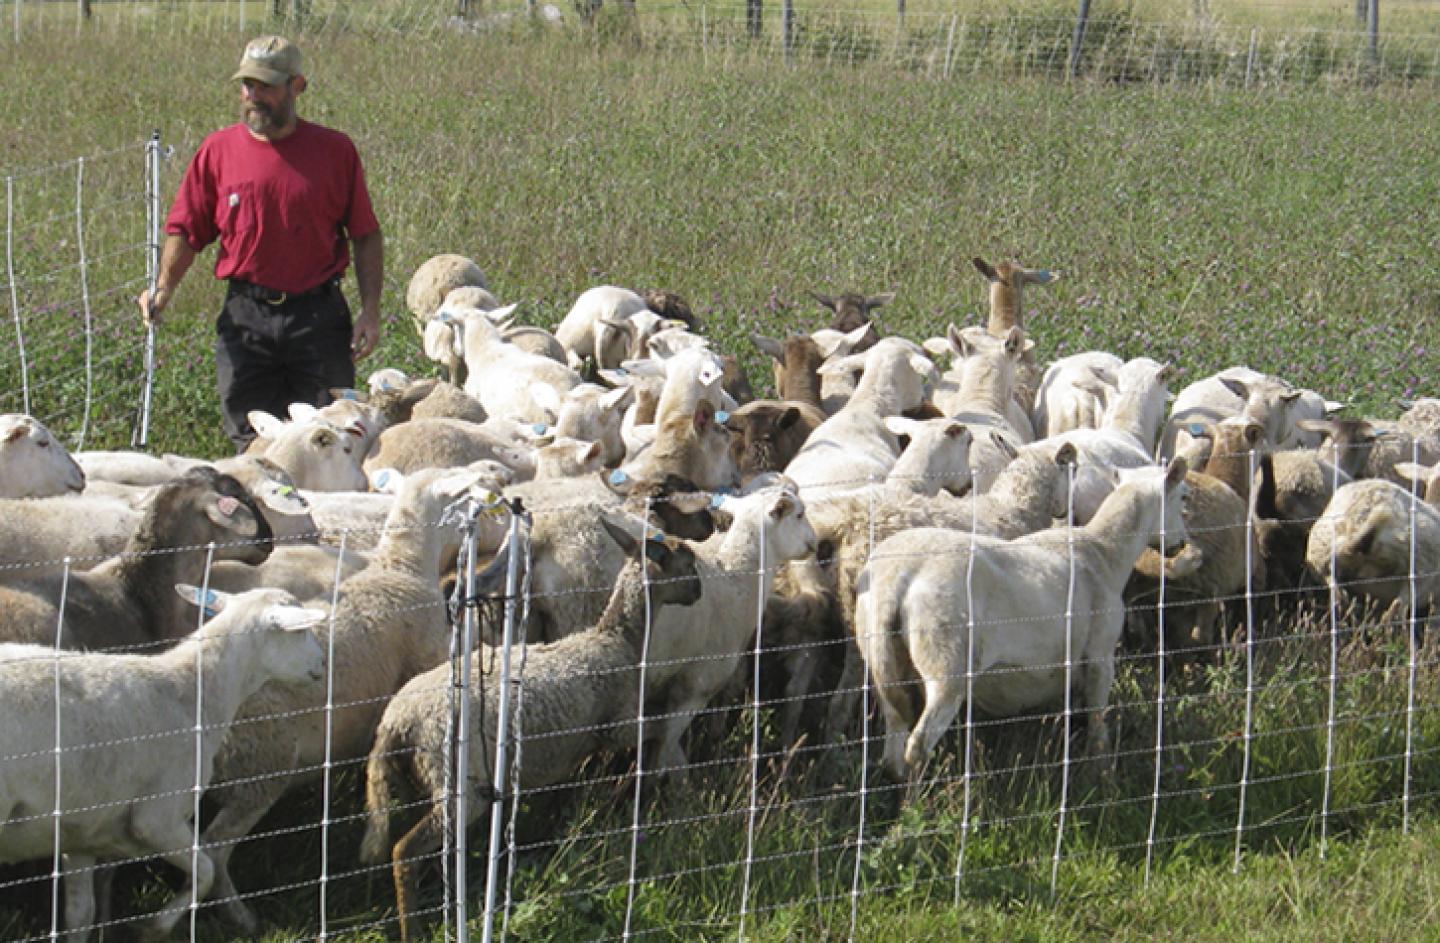 Opening a segment of temporary fence allows sheep to move from one paddock to the next.